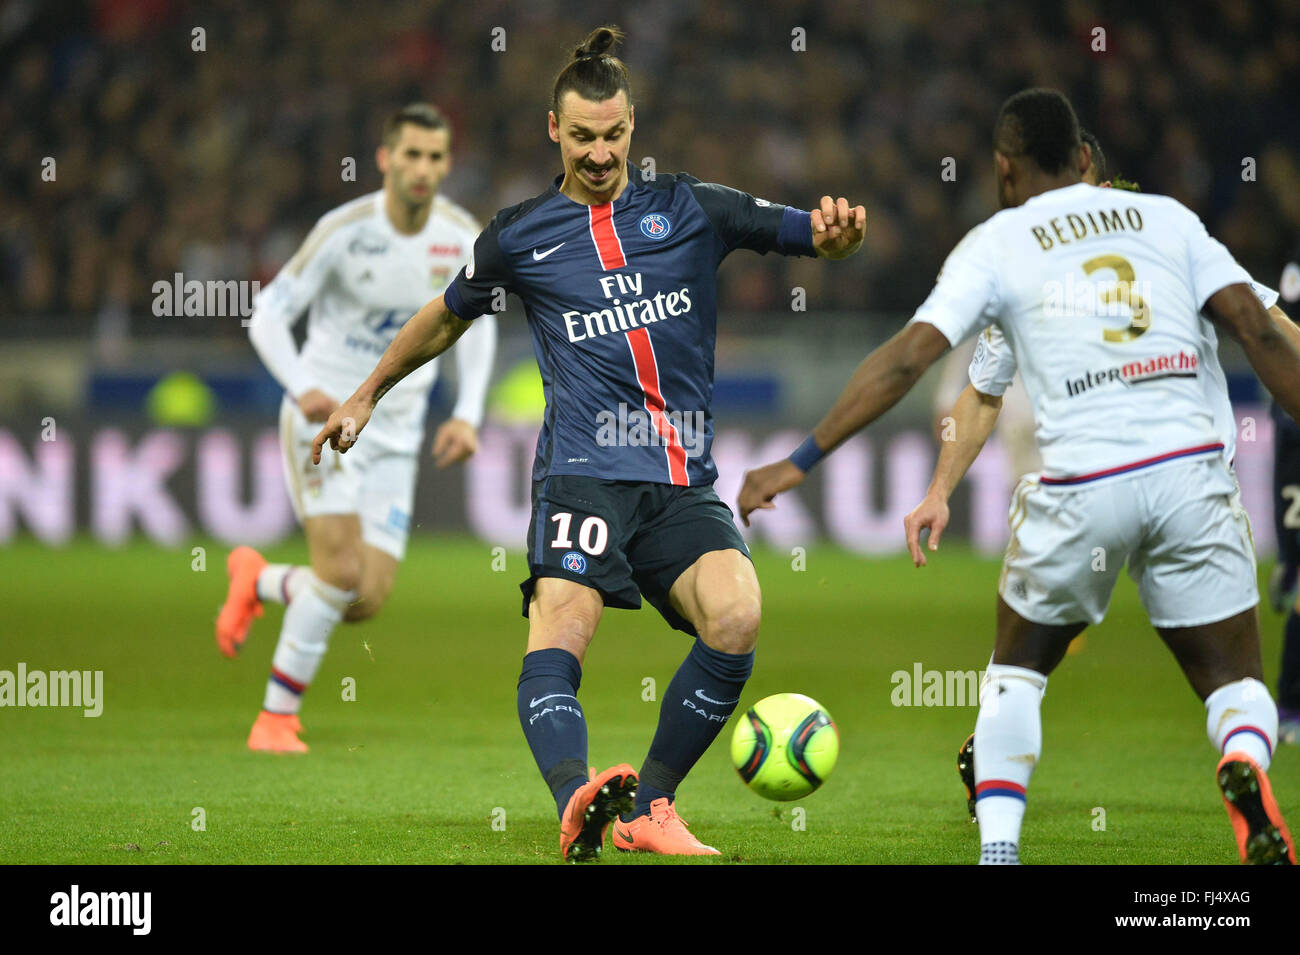 Lyon, France. 28th Feb, 2016. French League 1 football. Olympique Lyon versus Paris St Germain. ZLATAN IBRAHIMOVIC (psg) crosses in front of Bedimo © Action Plus Sports/Alamy Live News Stock Photo